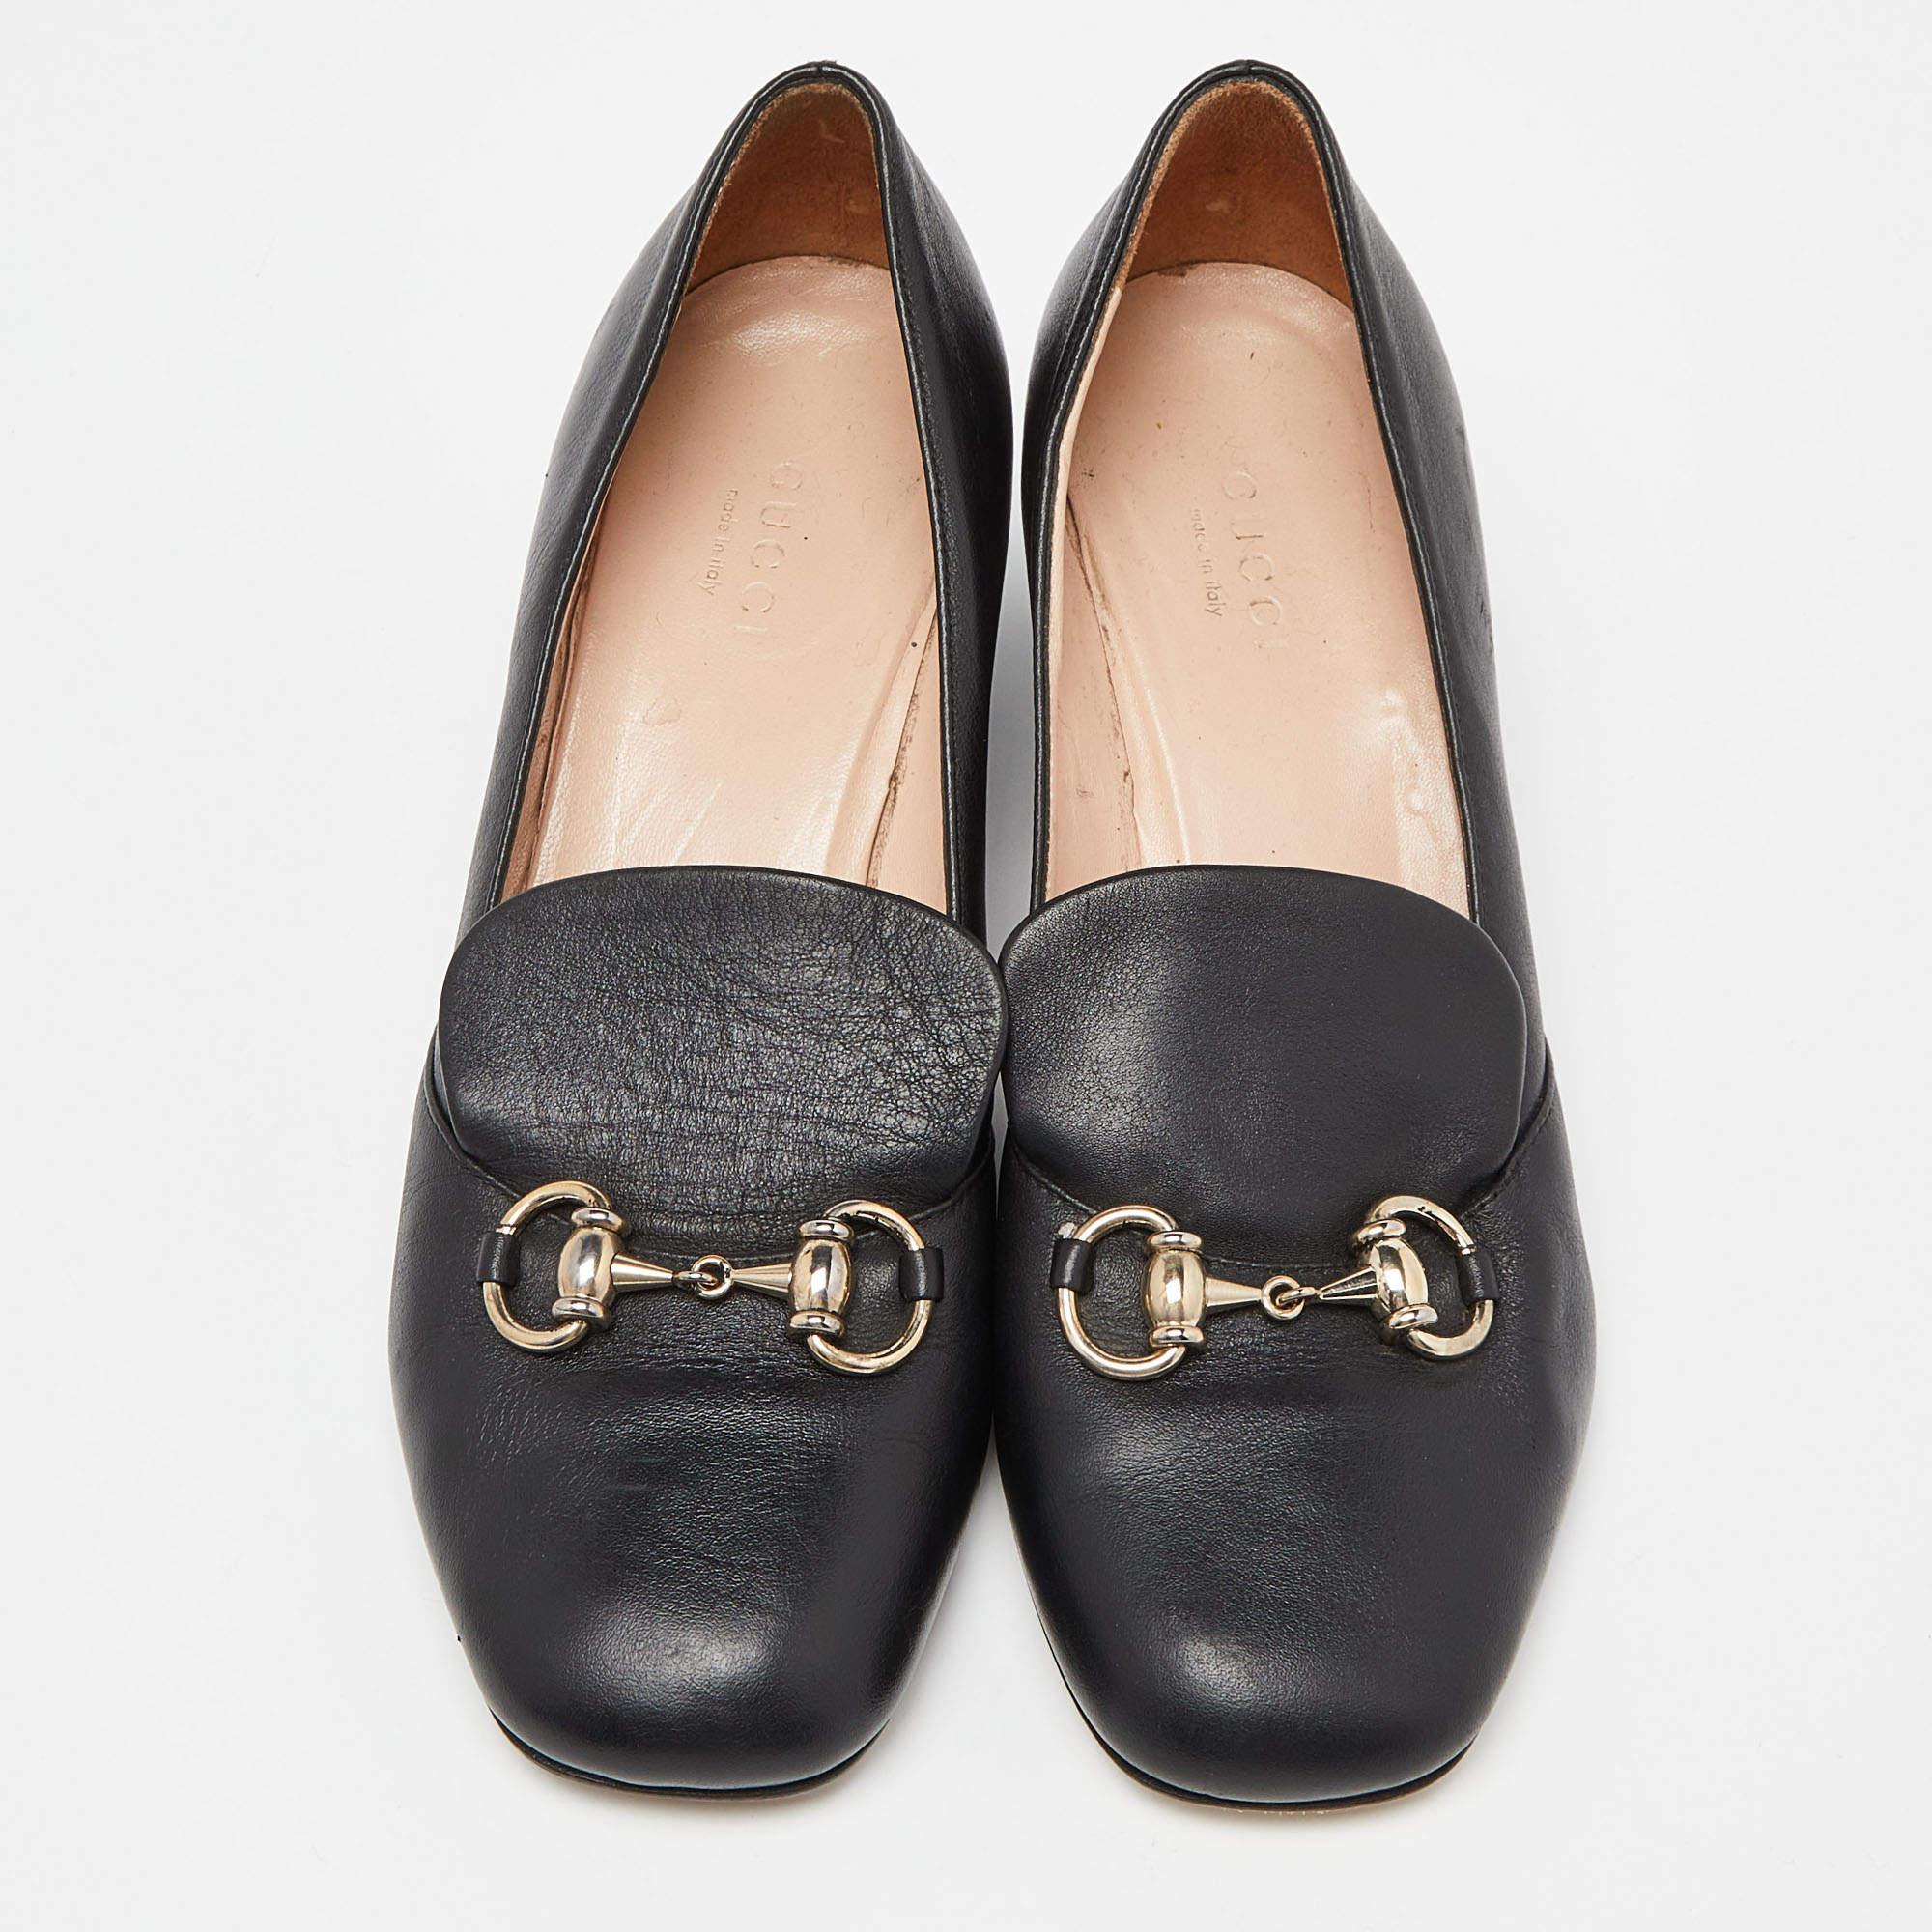 Finesse and poise will all come naturally to you when you step out in this pair of Horsebit pumps from Gucci. Crafted from leather, the black pumps have been styled with square toes, block heels and the iconic Horsebit detail on the uppers. The